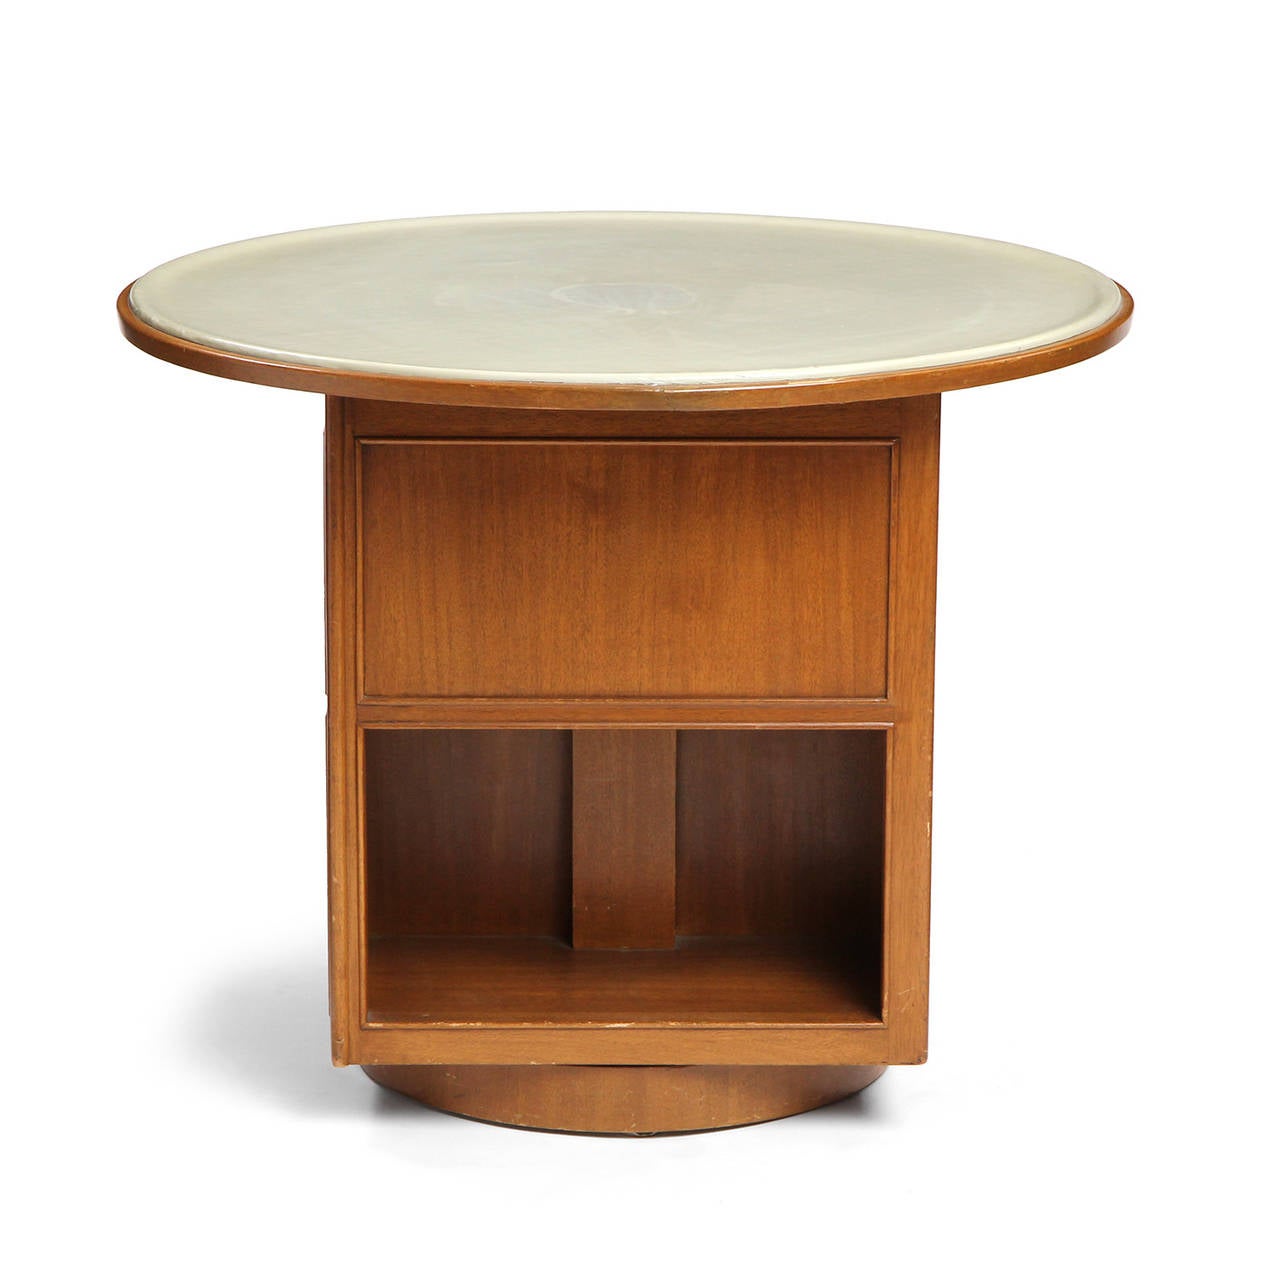 An uncommon architectural occasional table with a circular leather wrapped top that floats on a four sided Walnut square base with staggered recessed shelves. The entire table rotates on a lazy-susan style disc base.